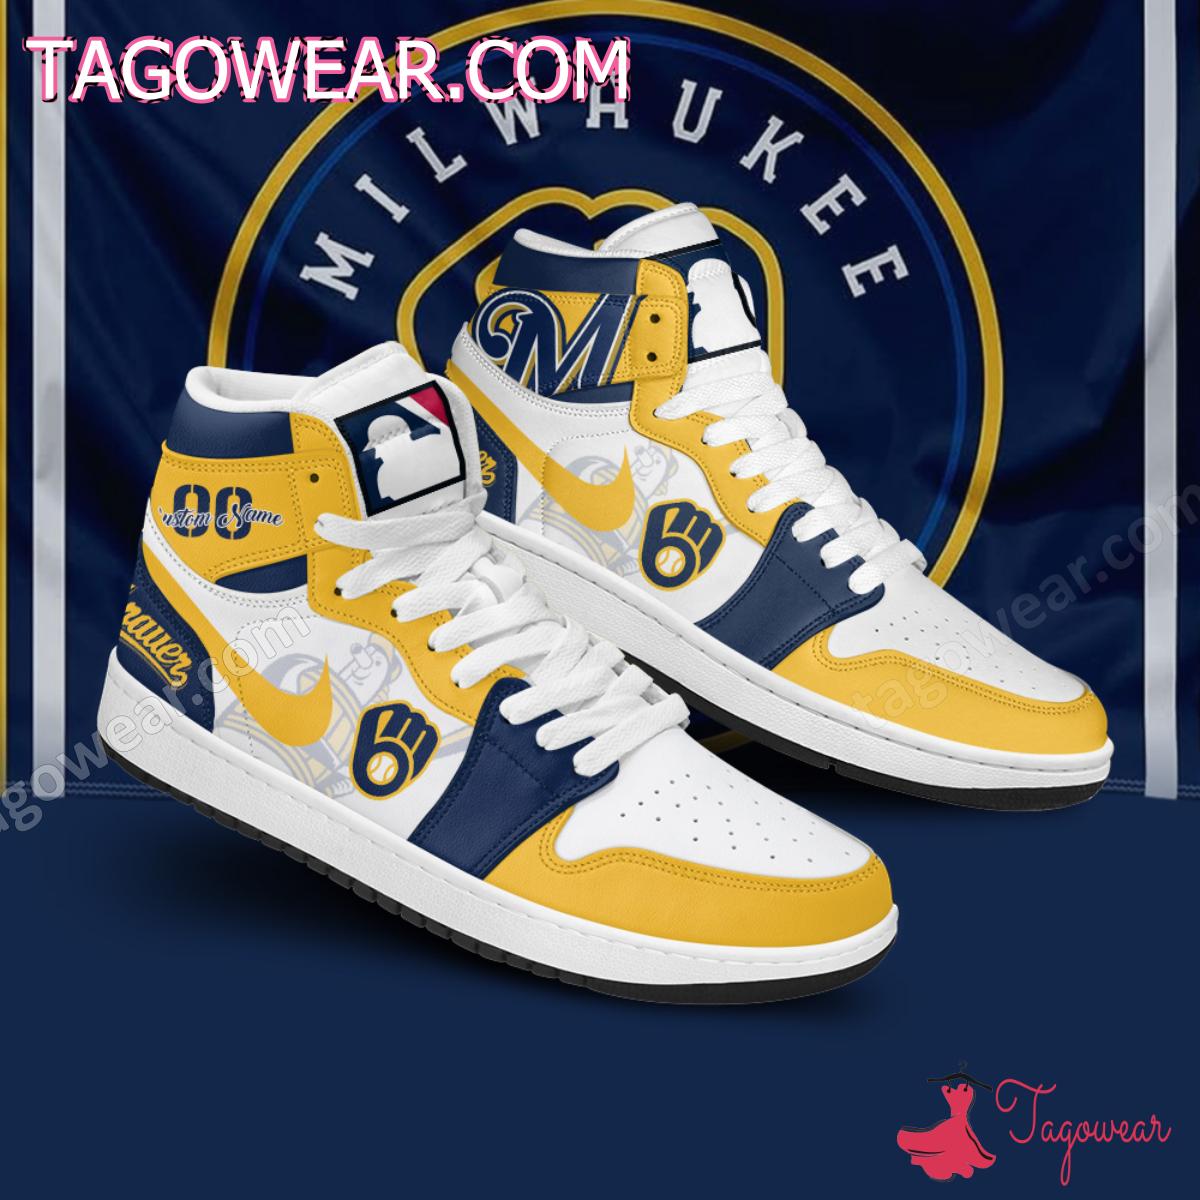 Mlb Milwaukee Brewers Personalized Air Jordan High Top Shoes a